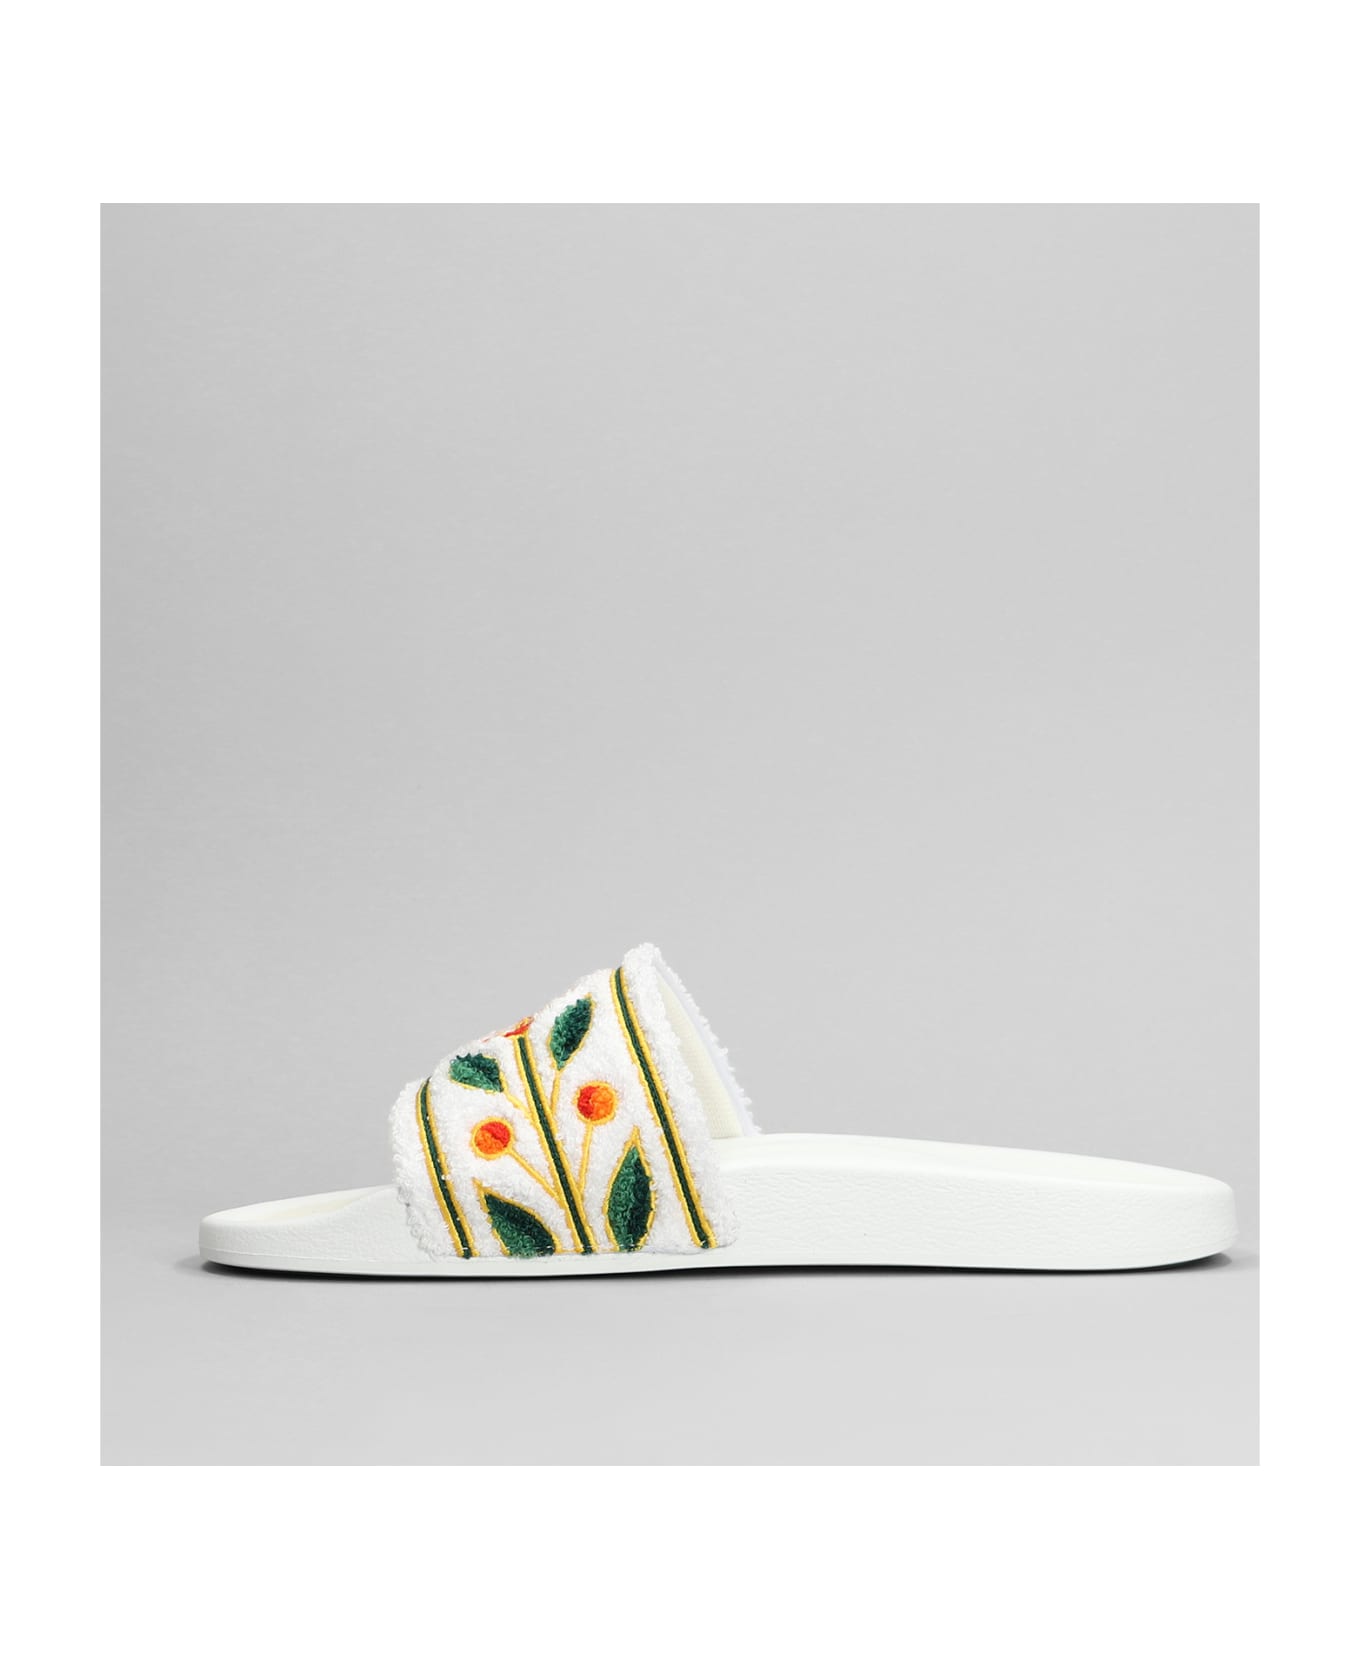 Casablanca White Slippers With Embroidery - White